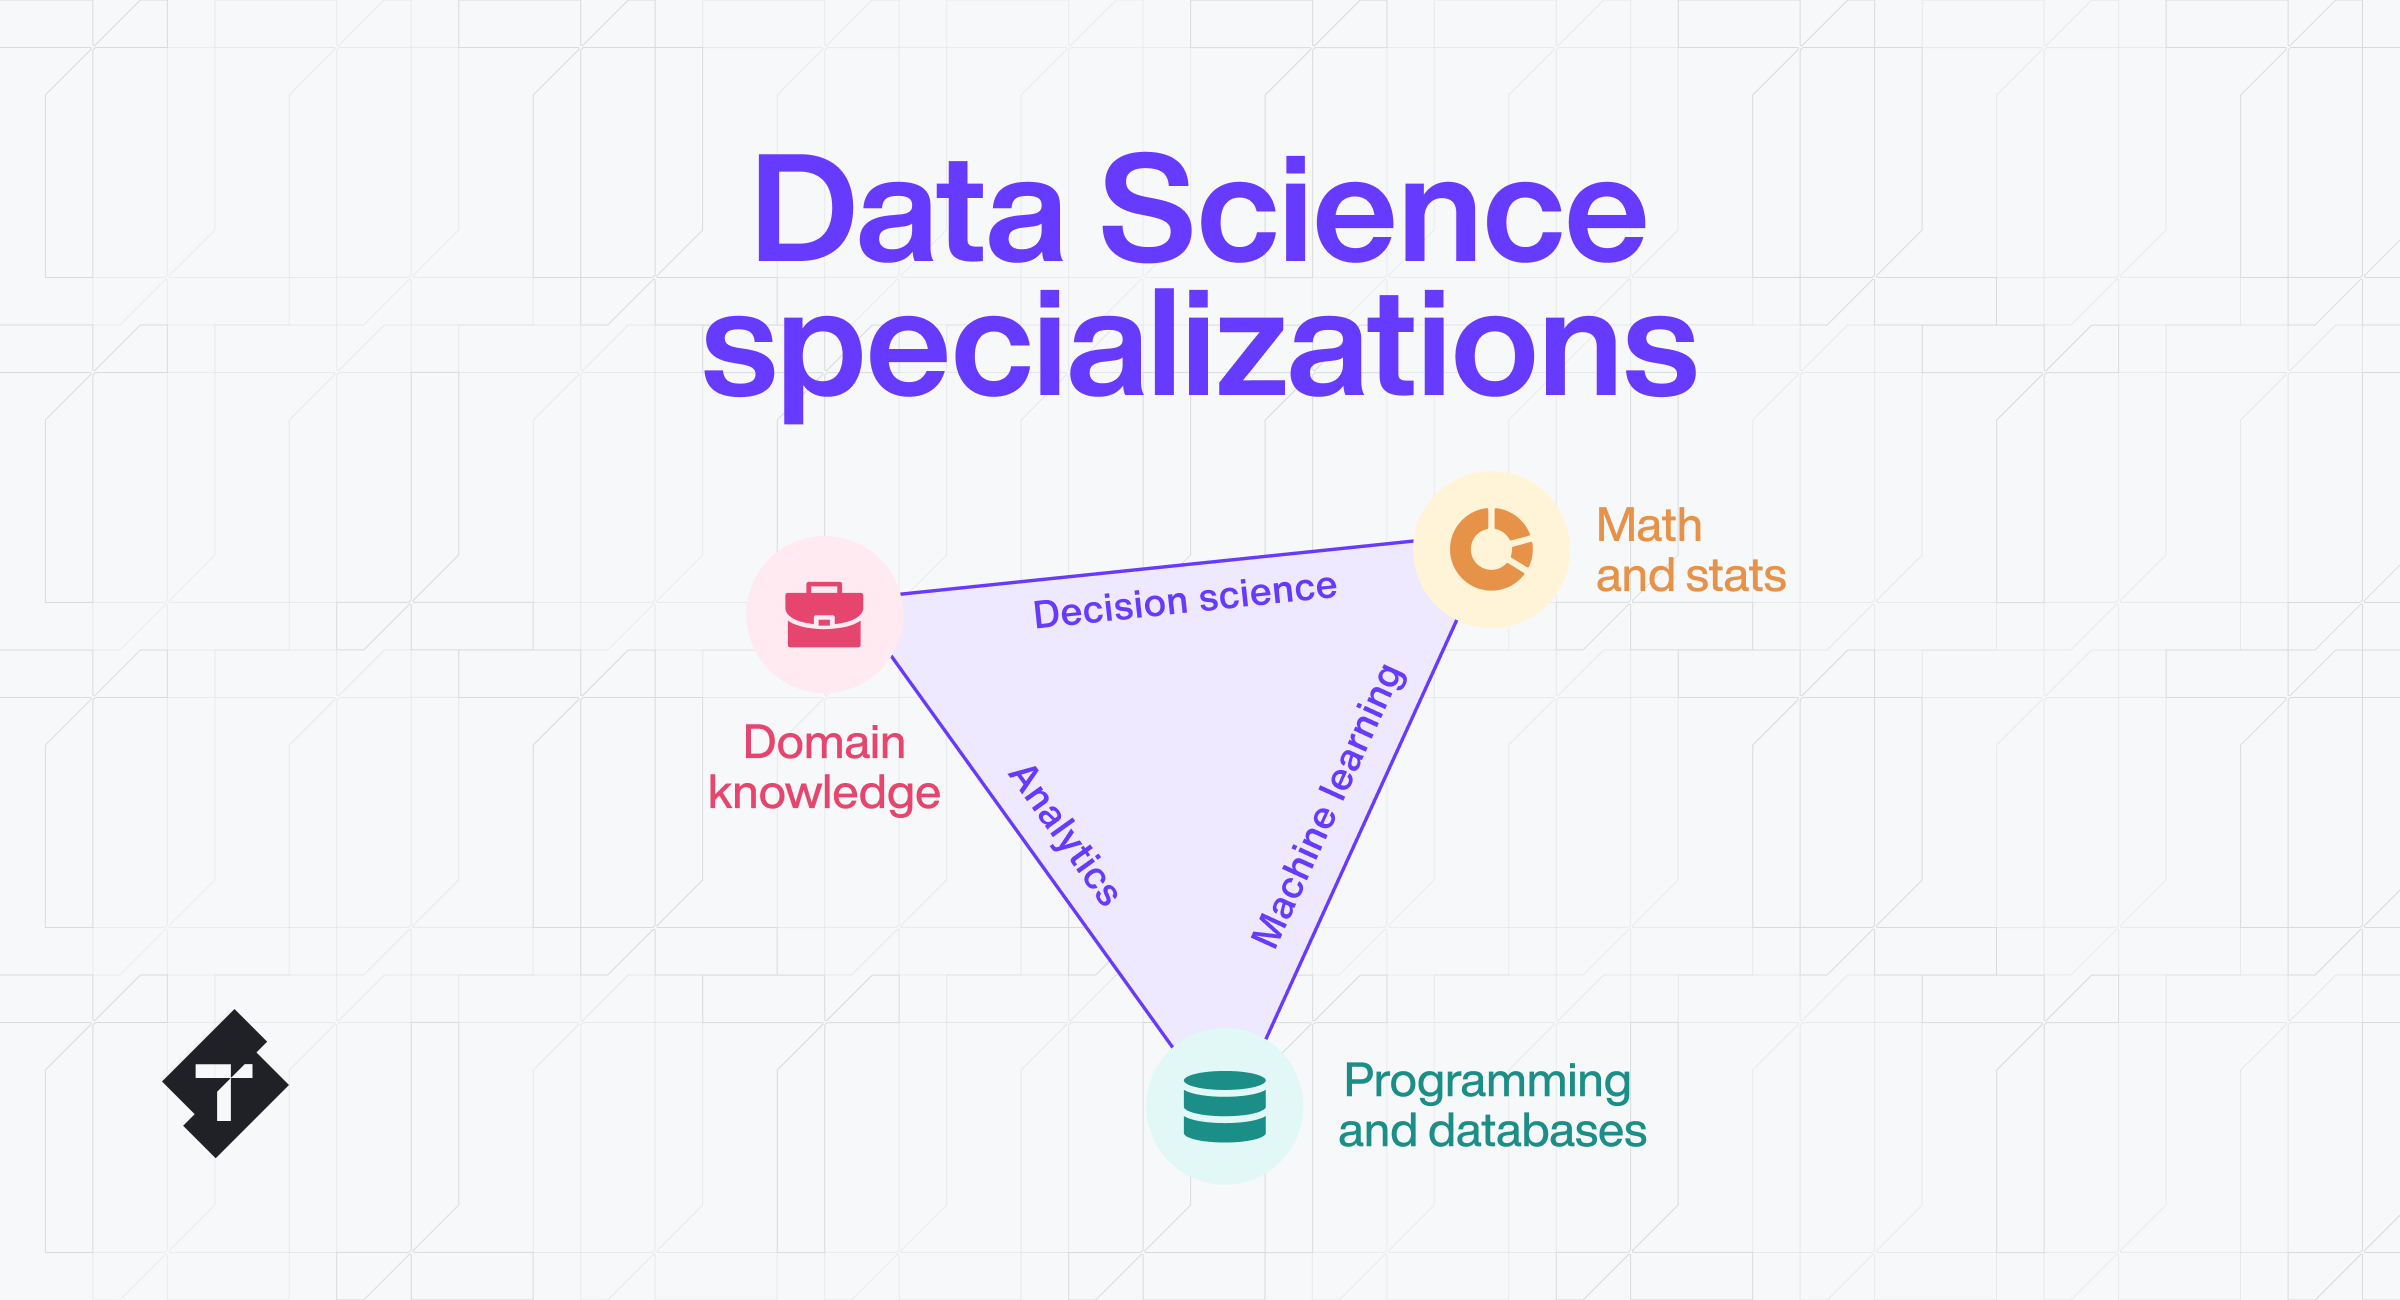 Data science specialization graph